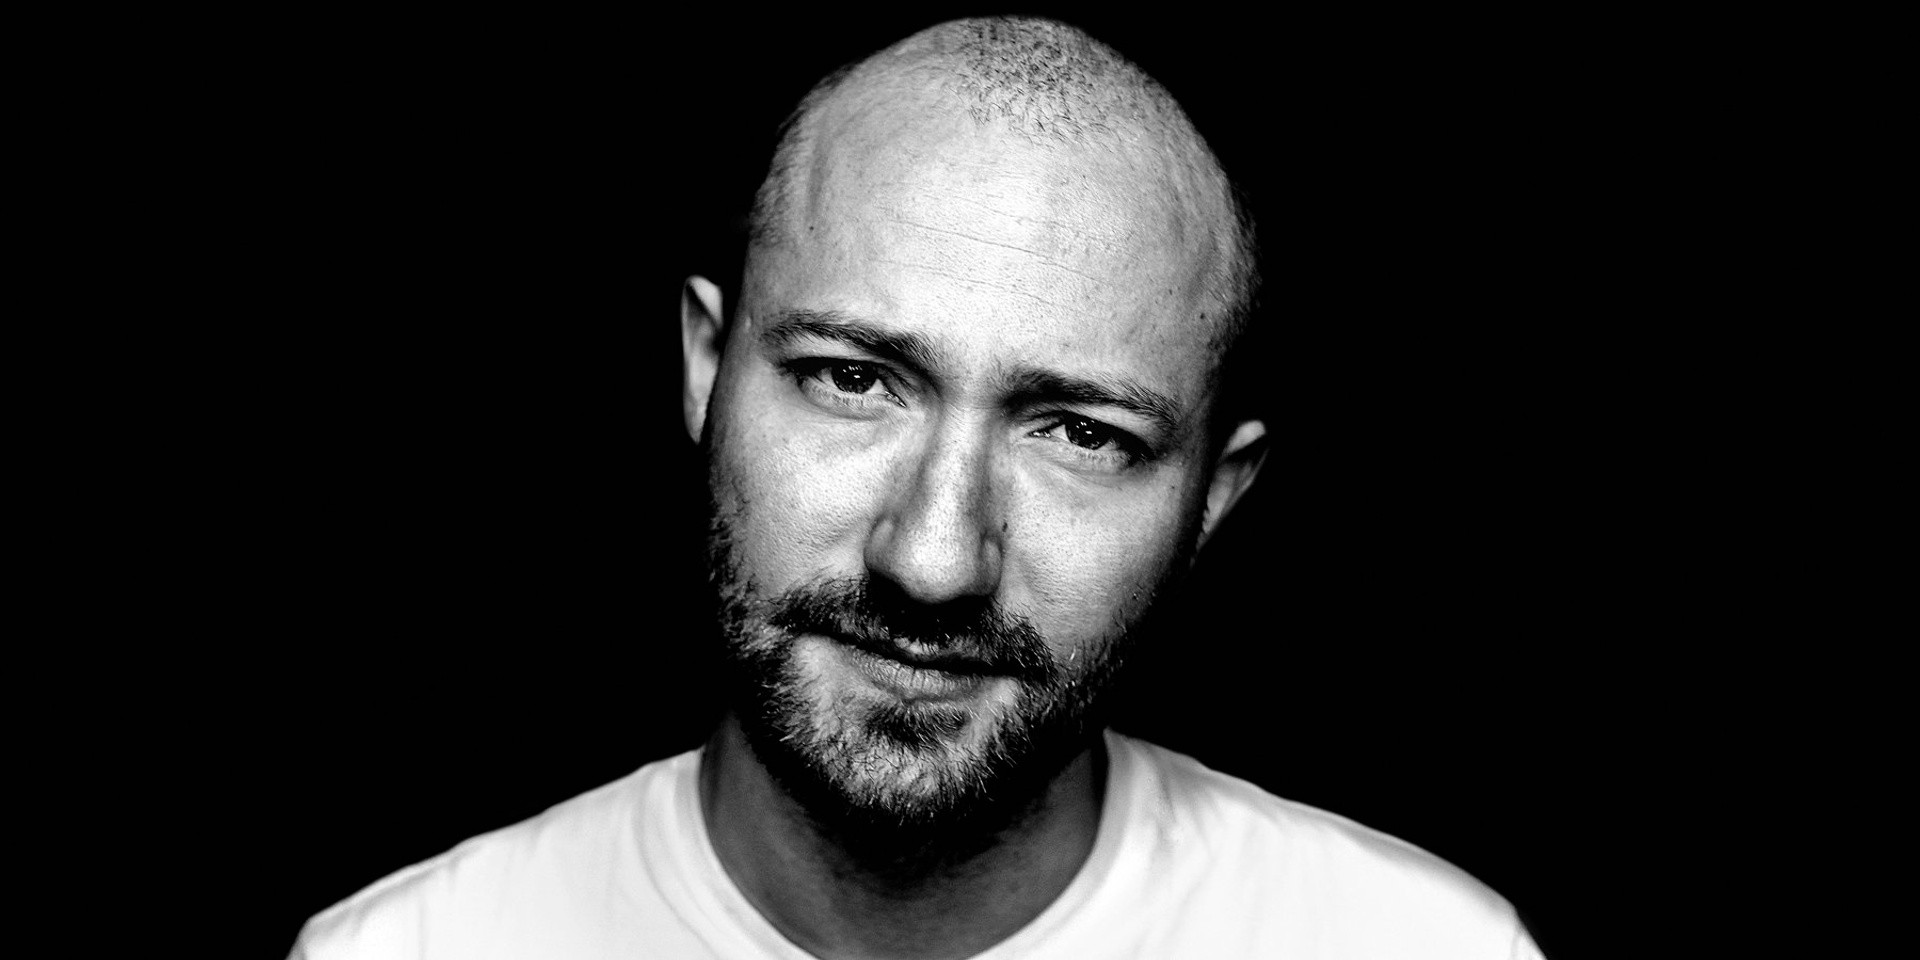 Berlin Called, We Answered: A conversation with Paul Kalkbrenner